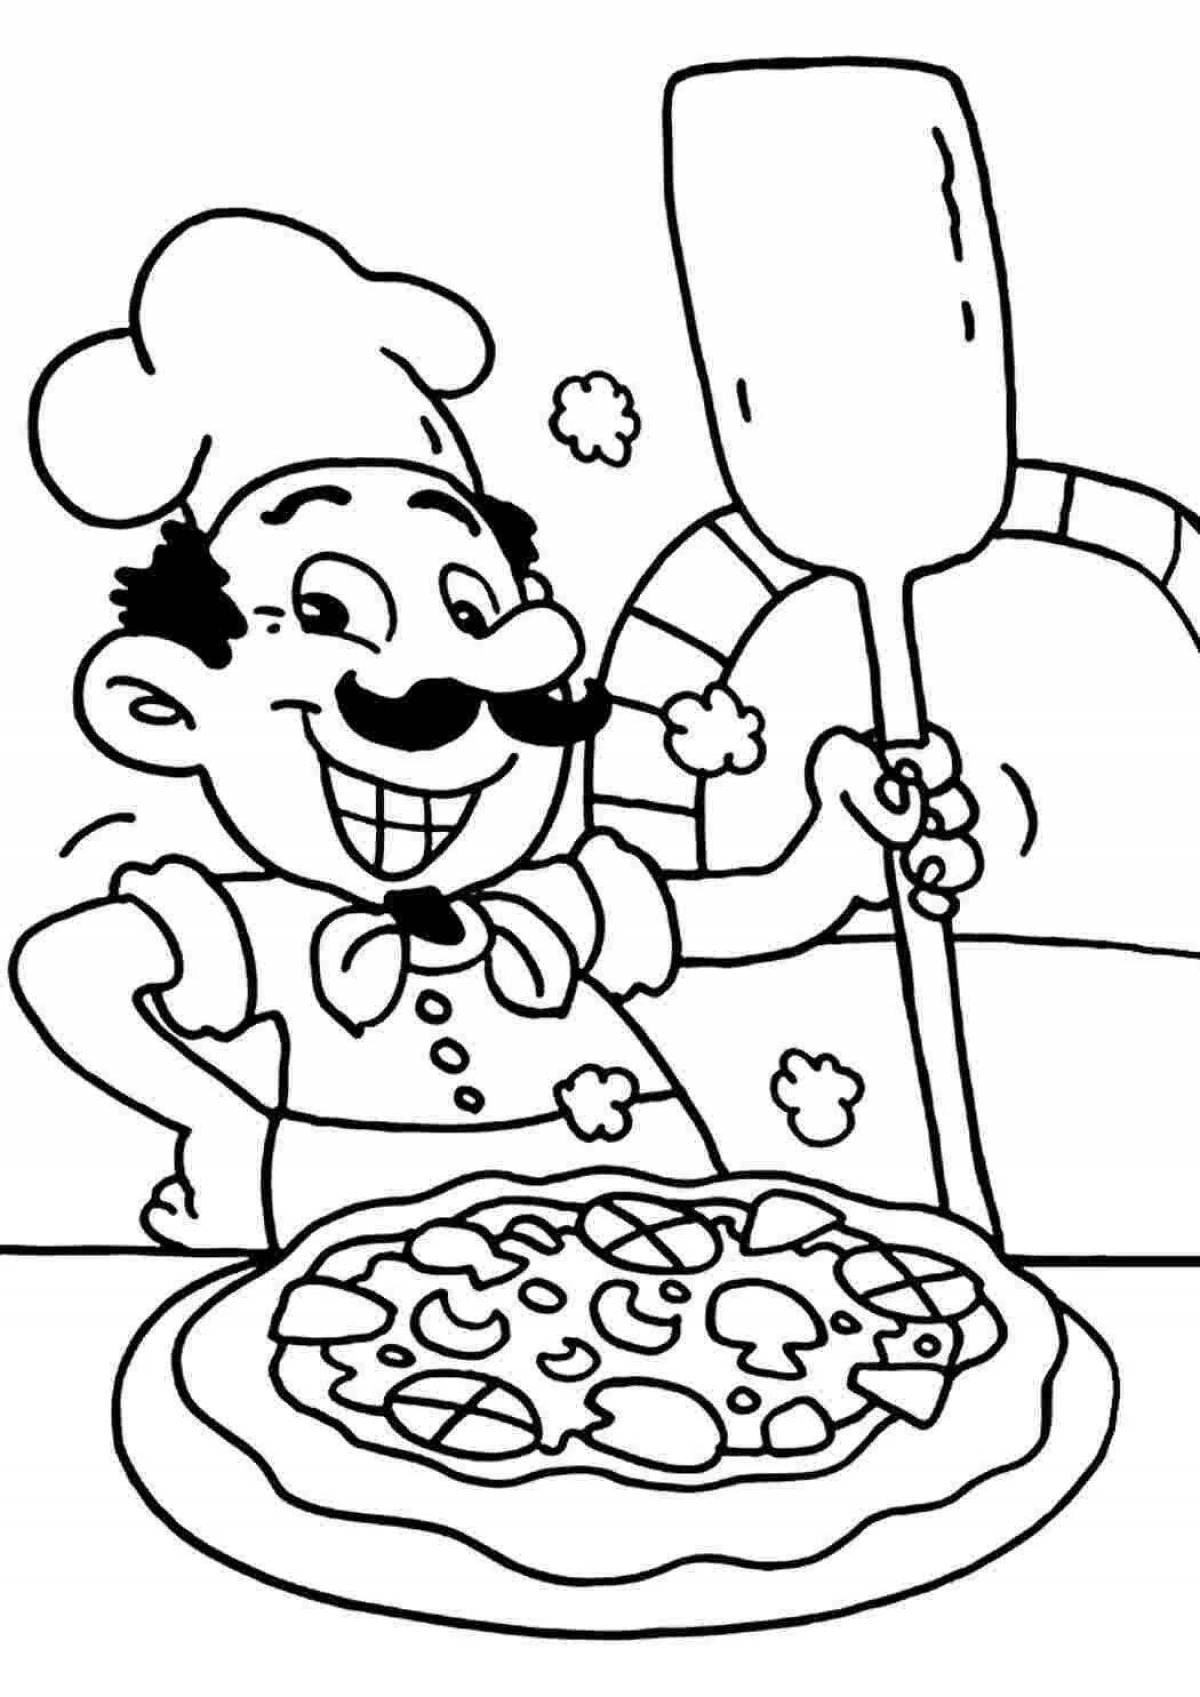 Cooking Cheerful Profession Coloring Page